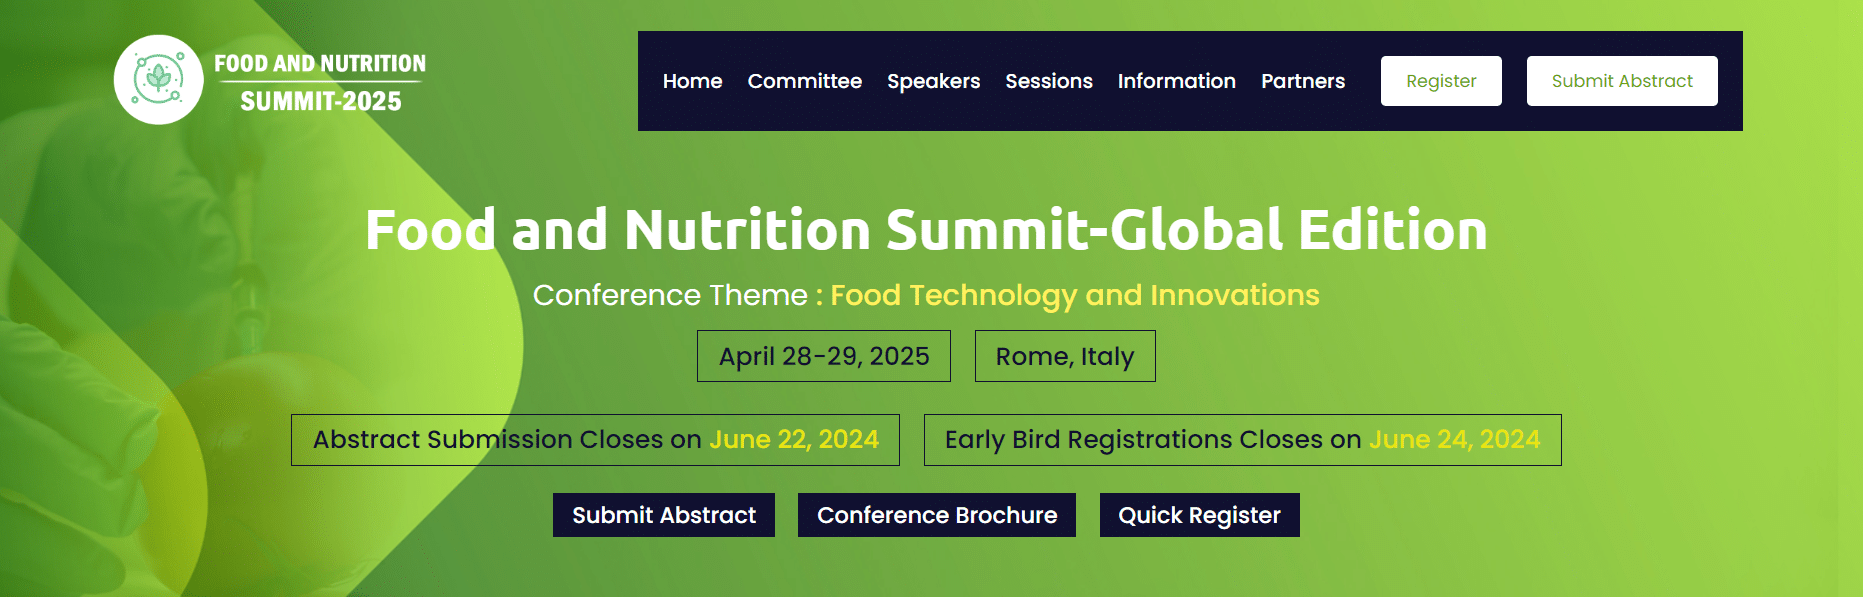 Food and Nutrition Summit-Global Edition